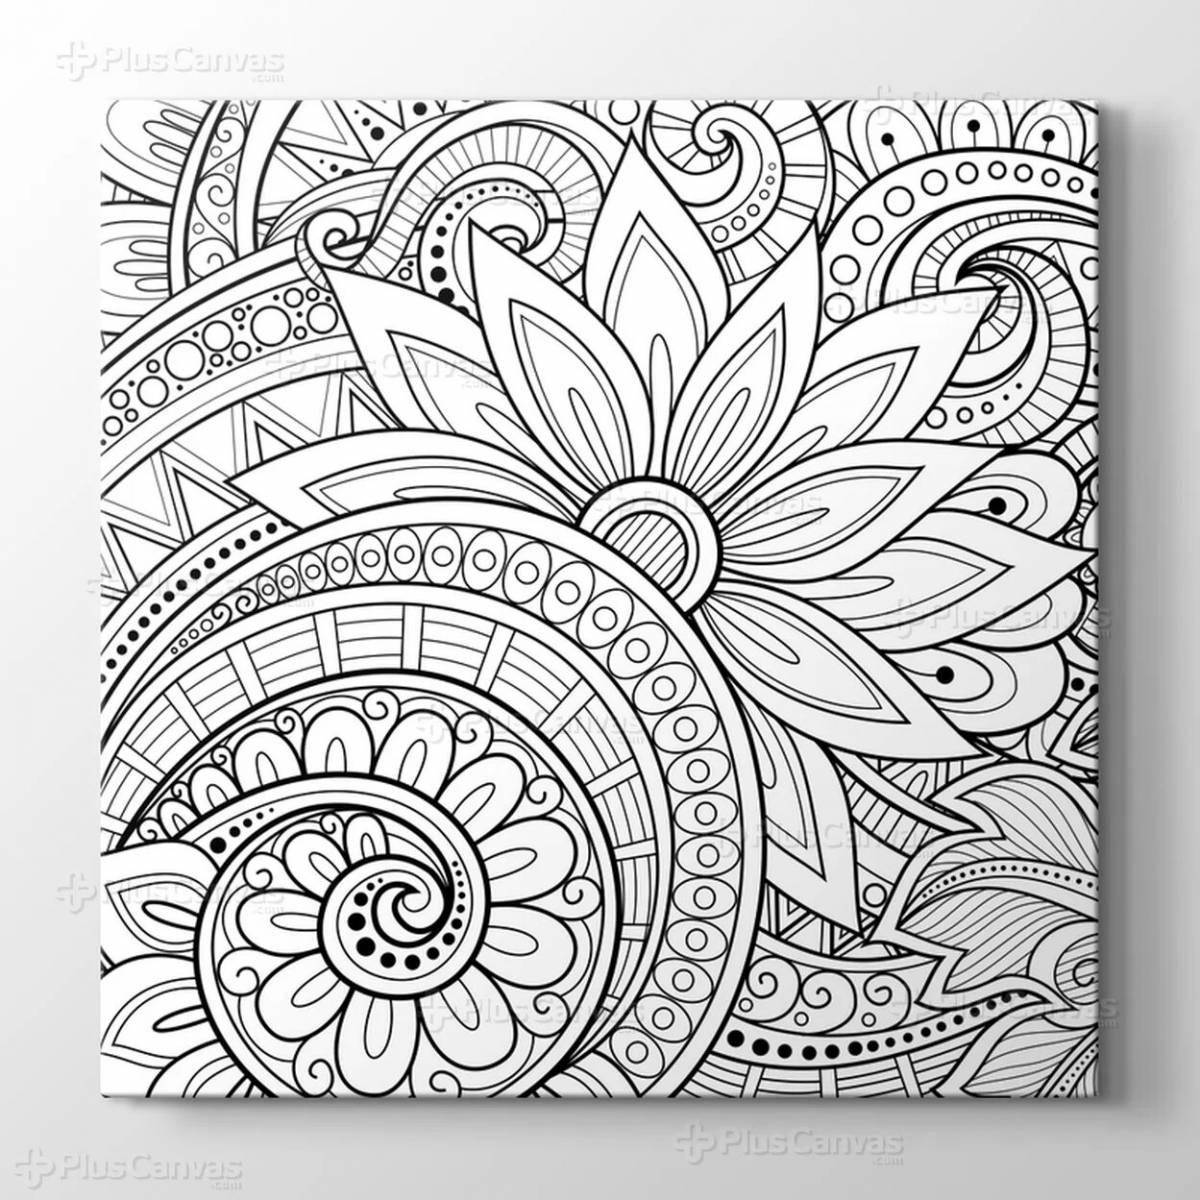 Glowing canvas coloring book